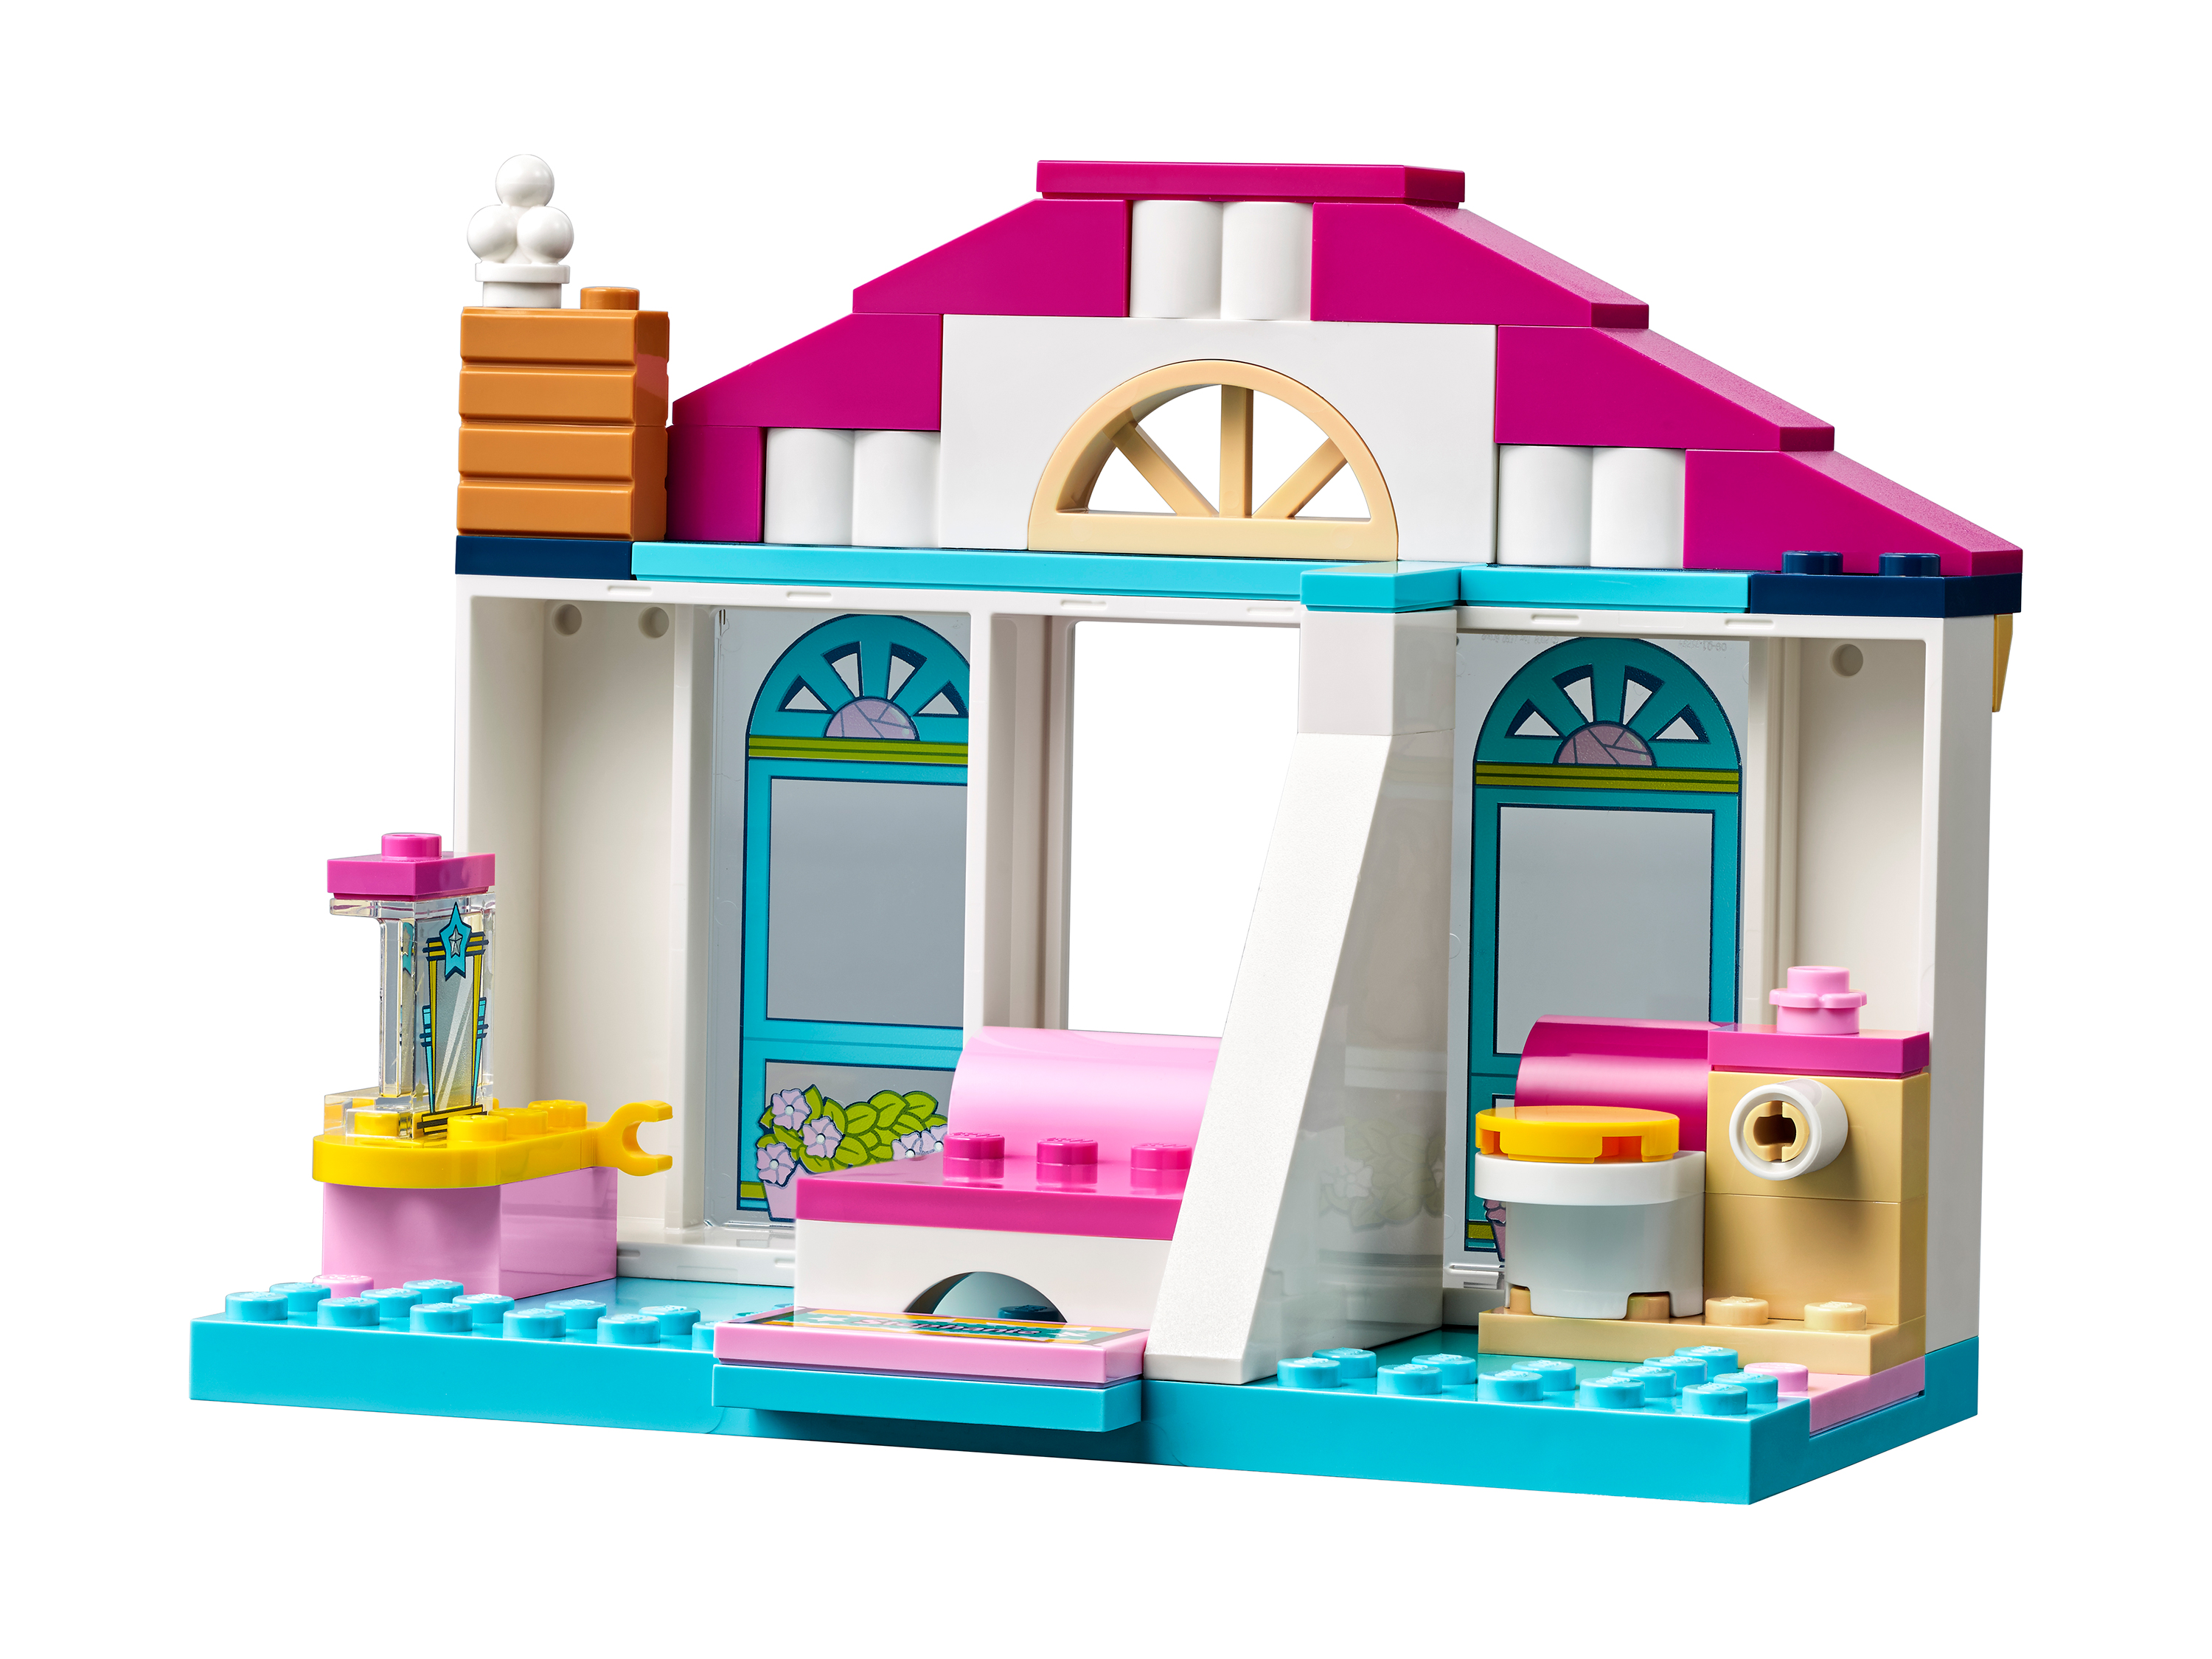 LEGO friends 41398 дом Стефани